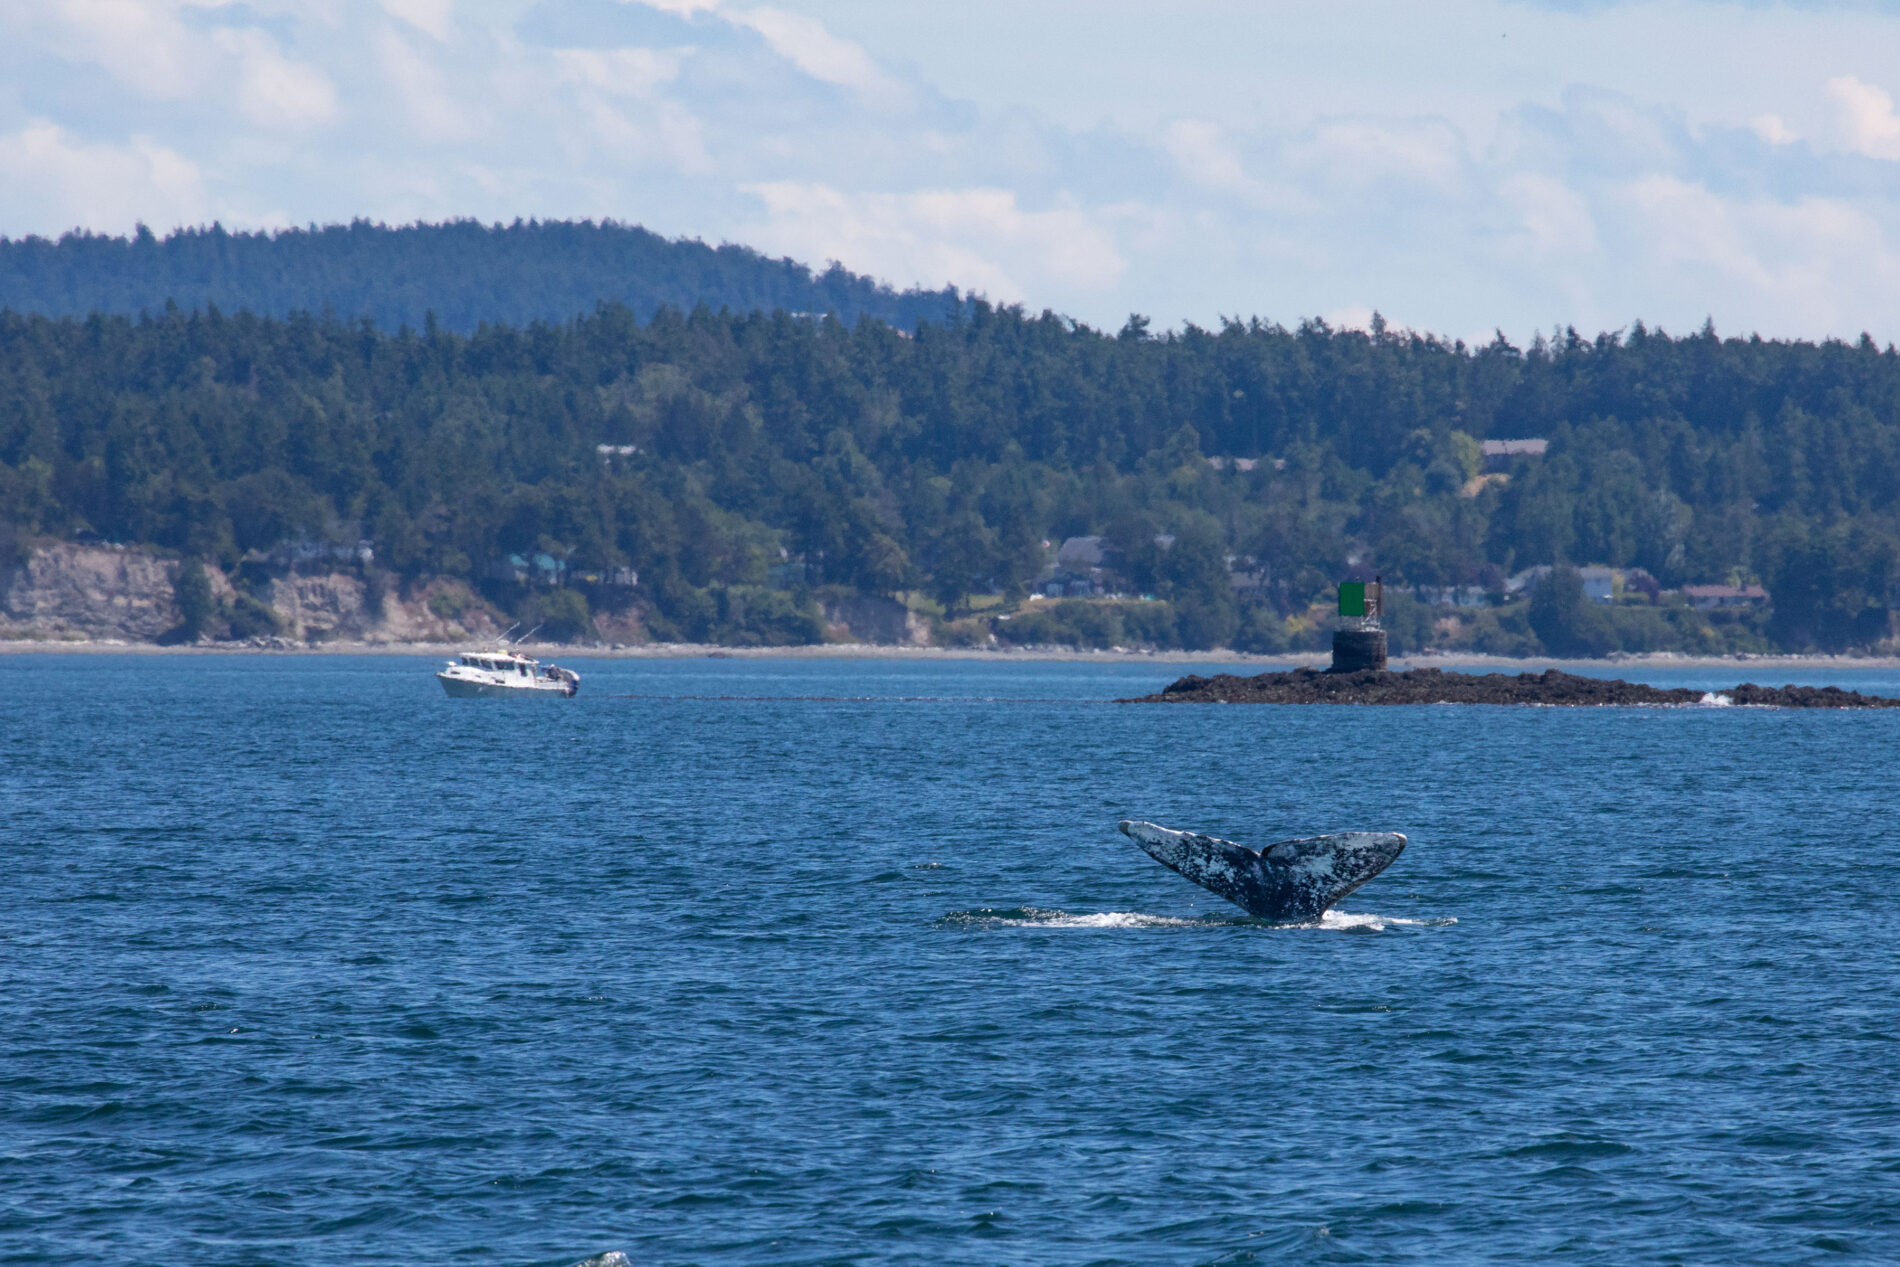 Whale watching in San Juan Islands gives you spectacular views, like this gray whale's tail as it dives for food.